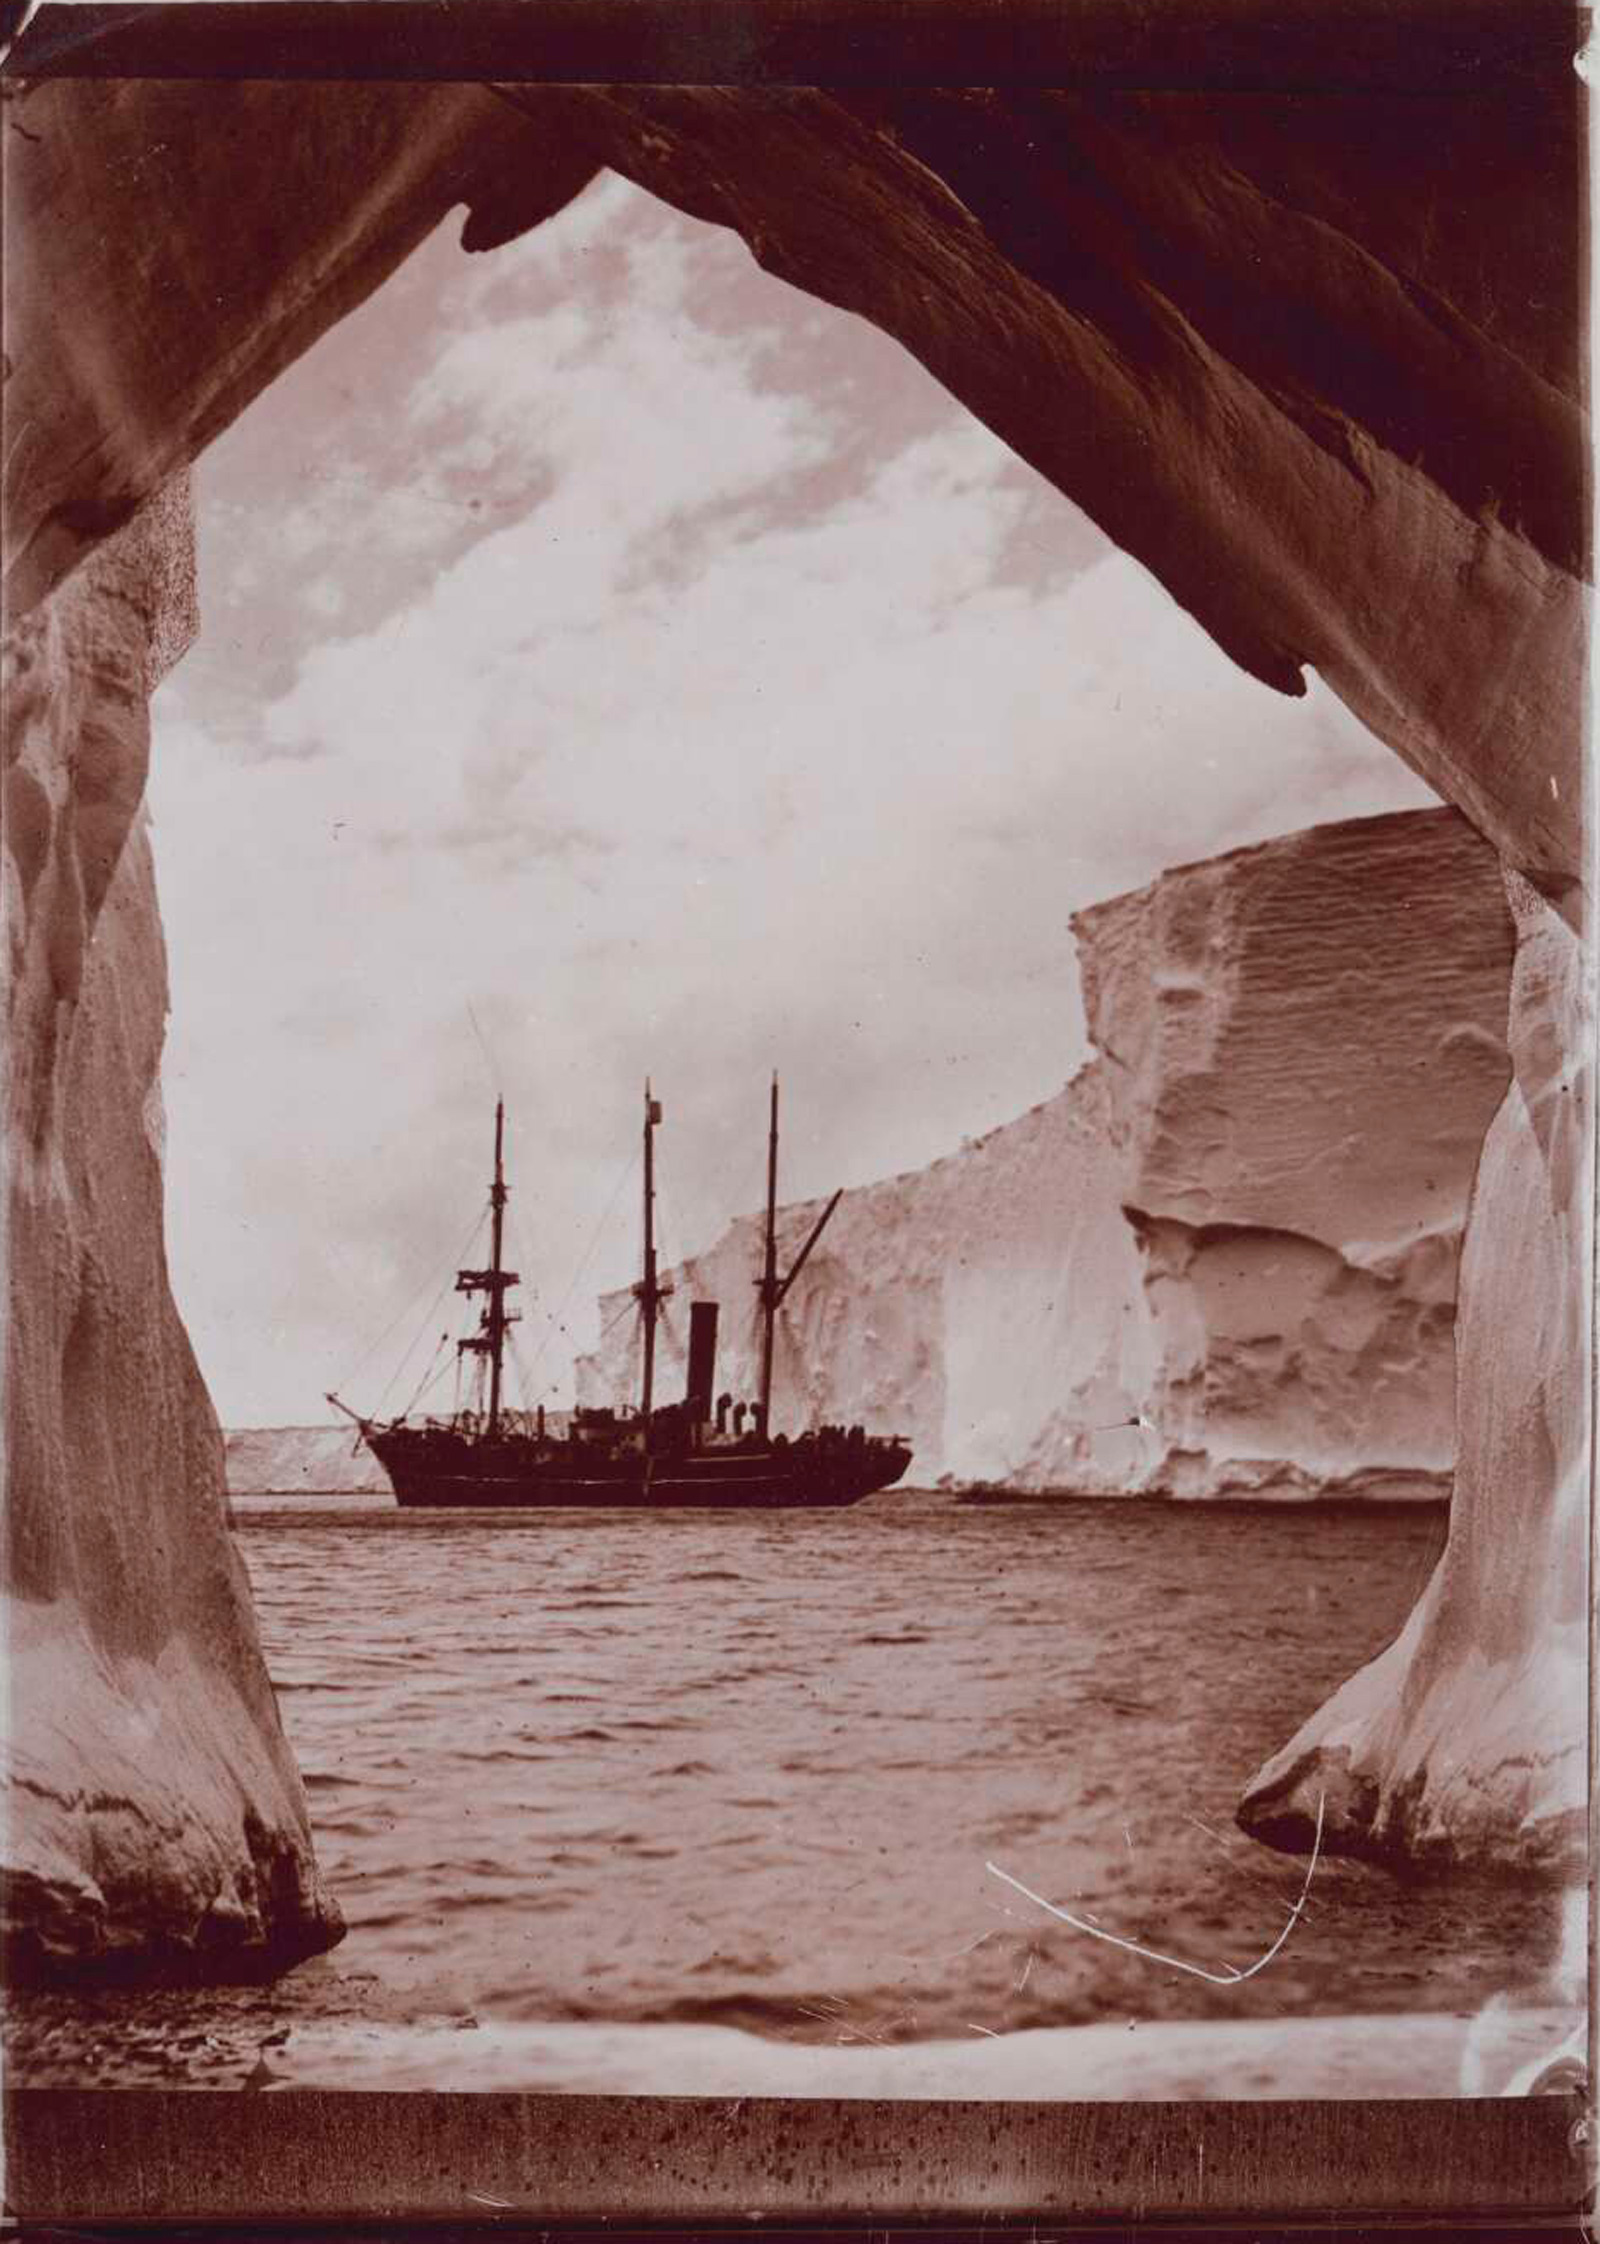 <p>A glimpse from within the cavern of the Mertz Glacier, Australasian Antarctic Expedition, 1911–1914</p>
